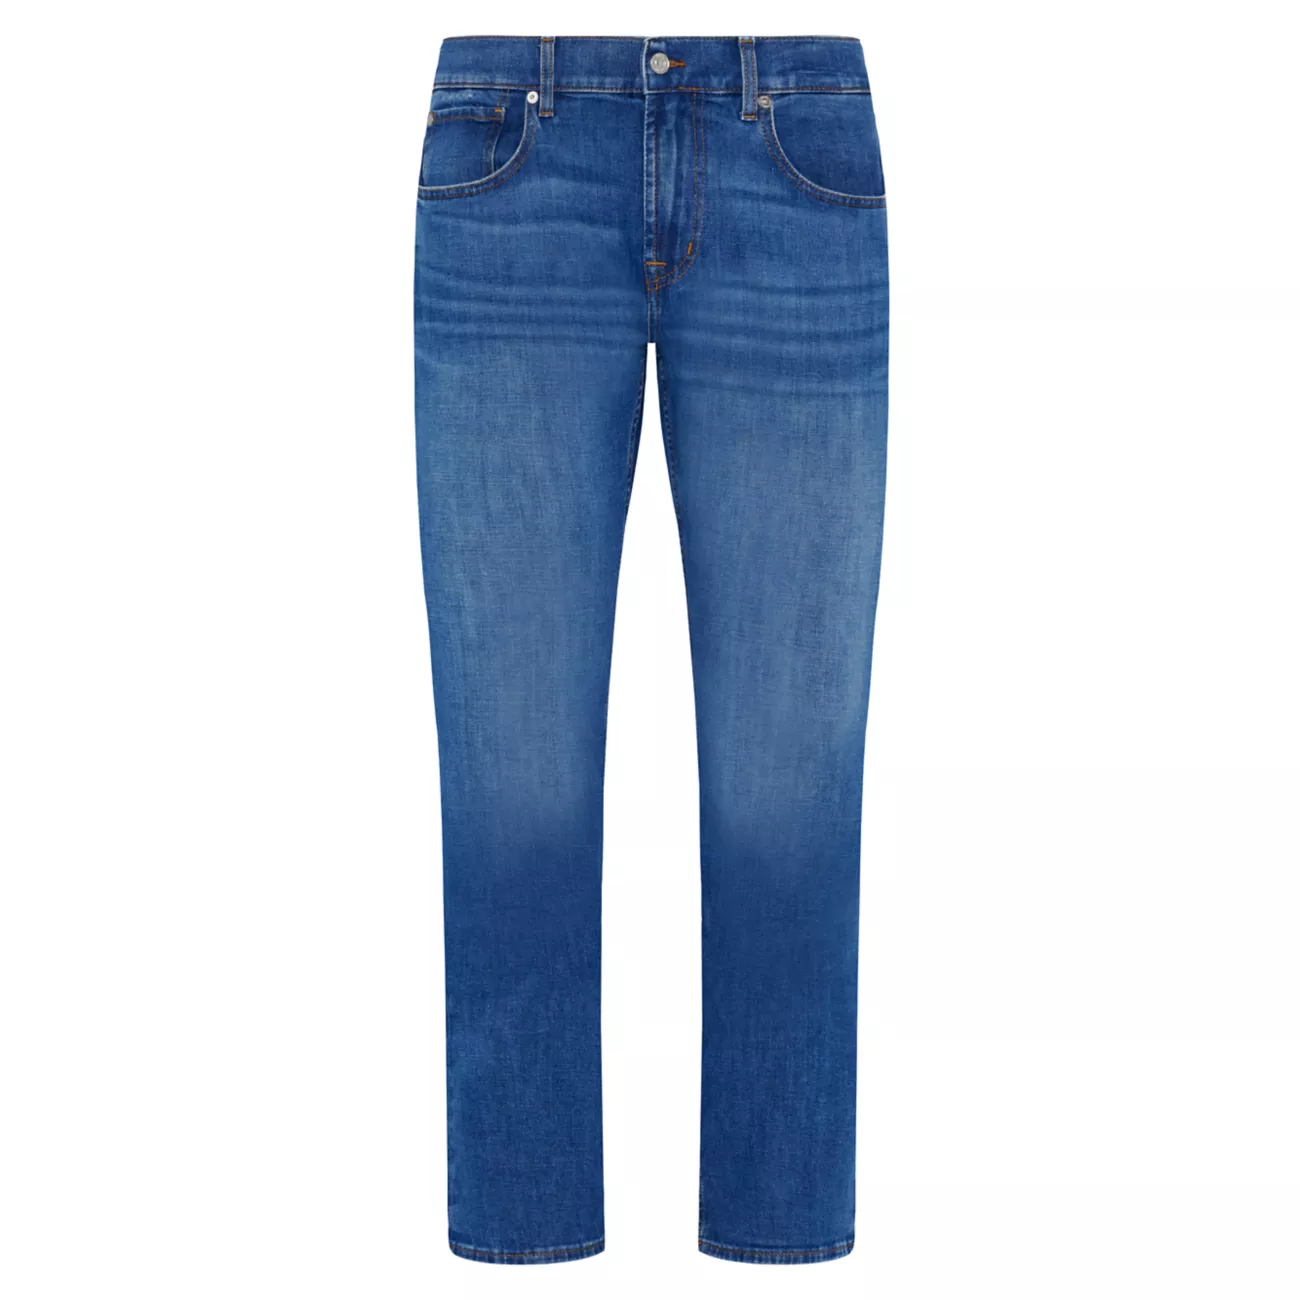 The Straight Stretch Jeans 7 For All Mankind